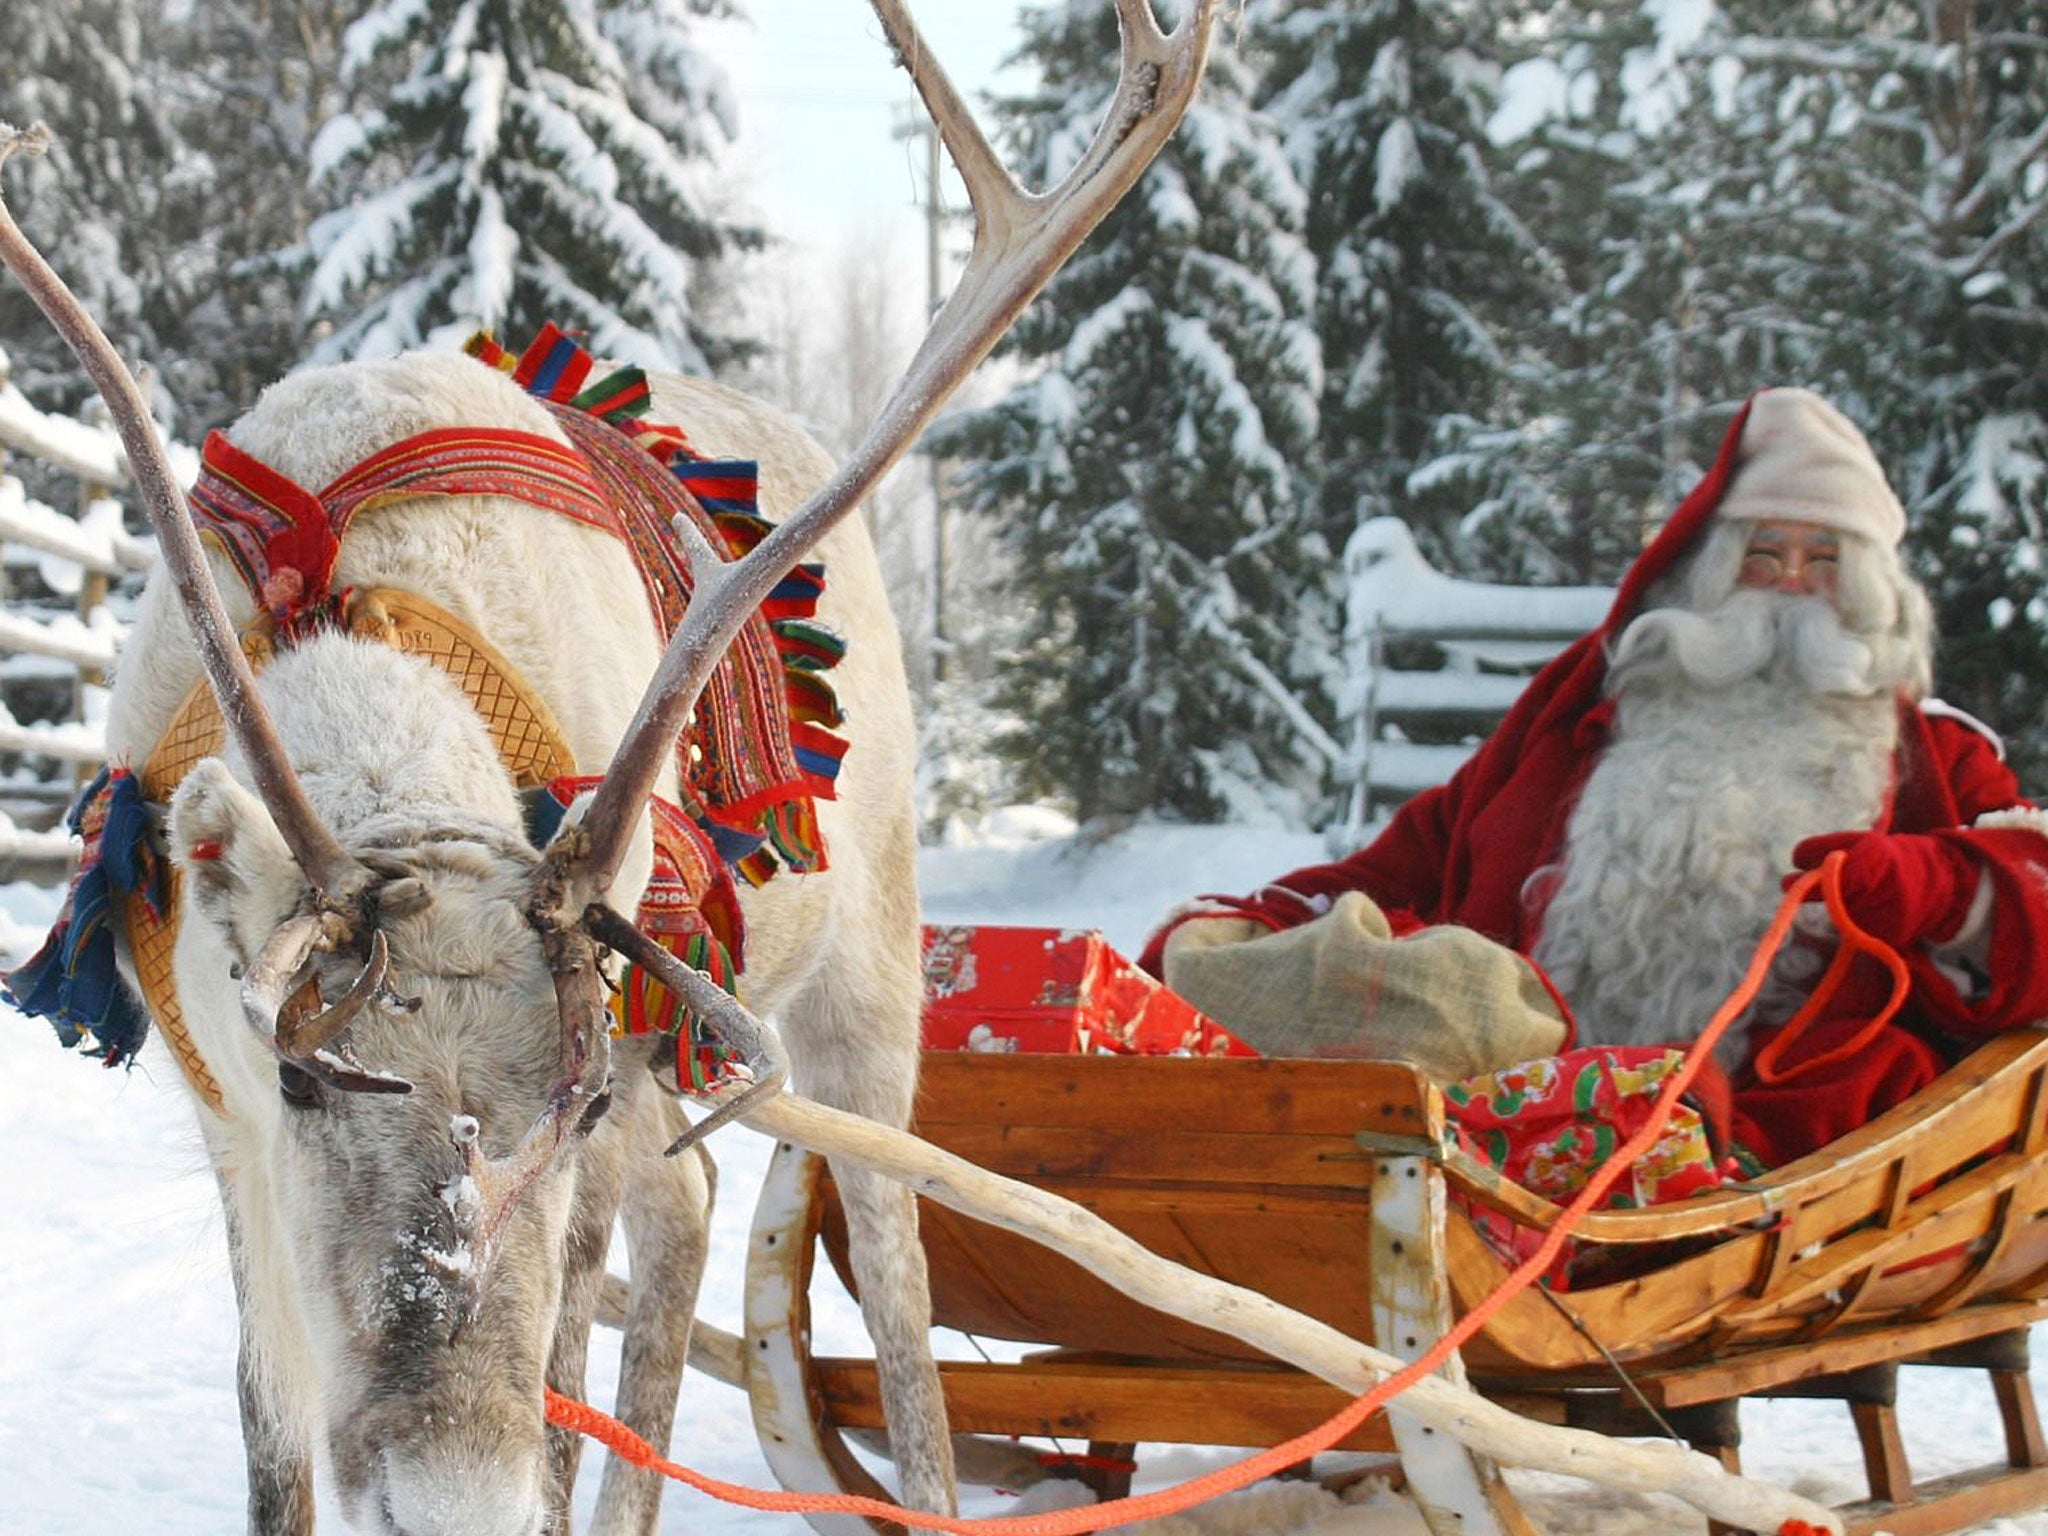 Traveller's Guide Lapland drive huskies, meet Santa Claus and try to